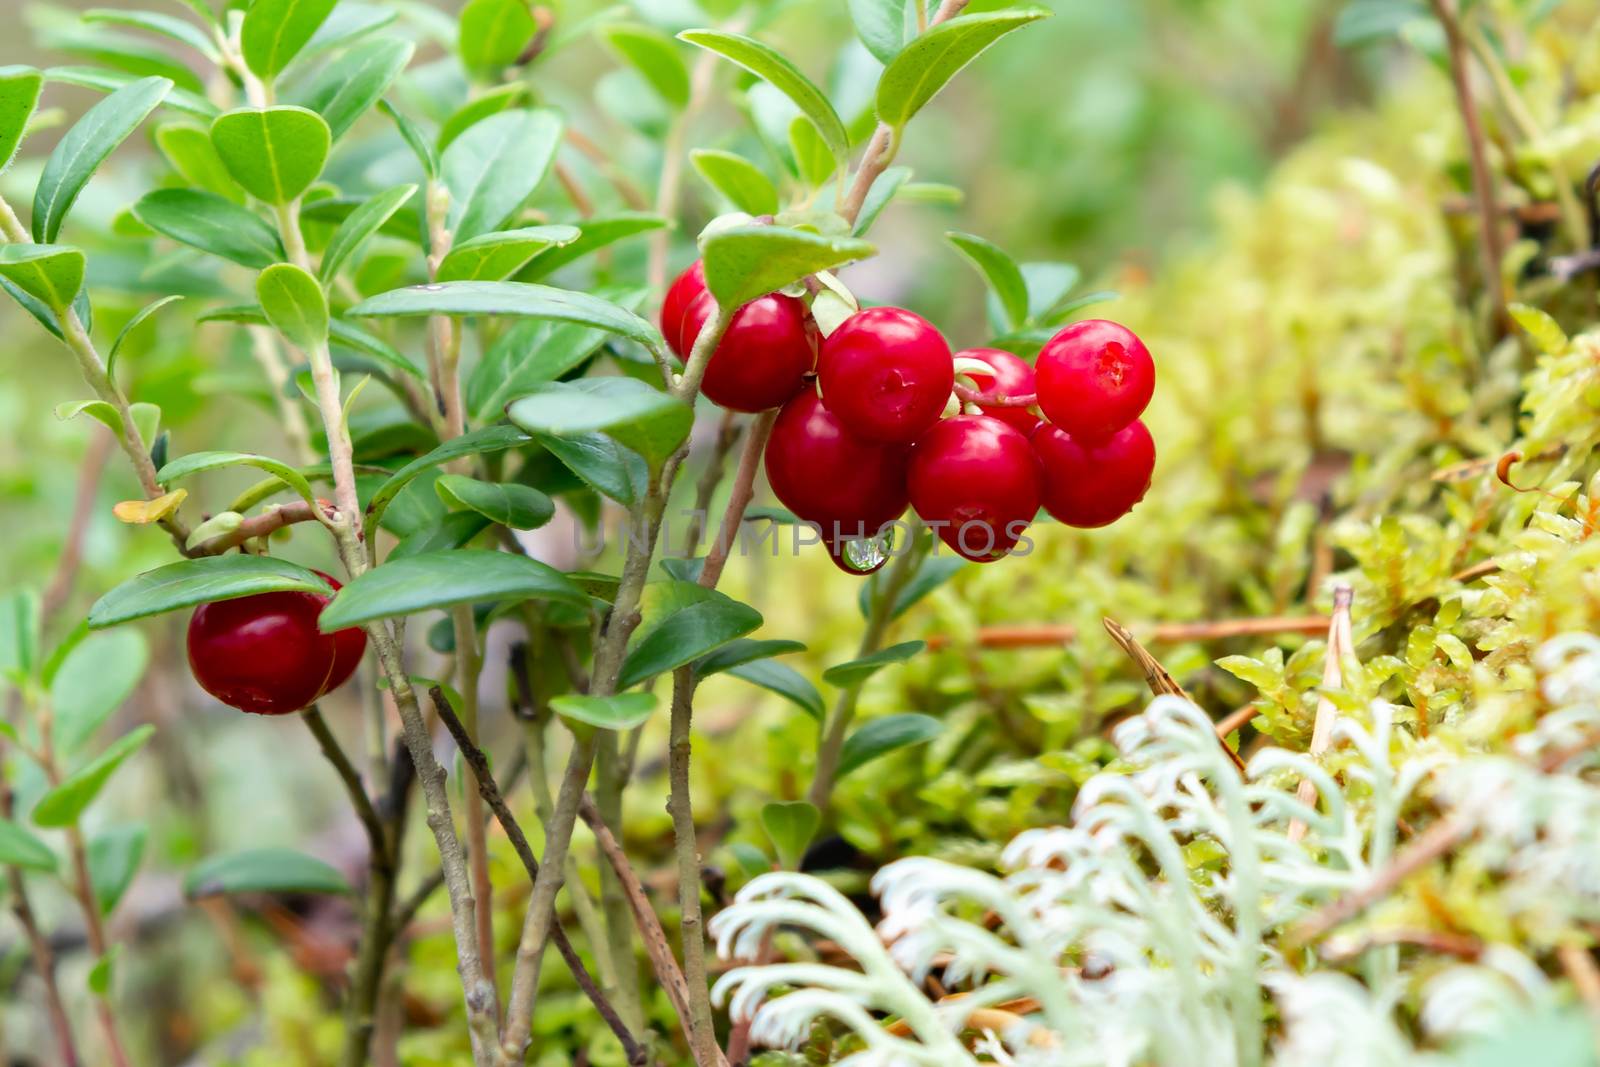 Bunch of lingonberries on a branch in the forest surrounded by white and green moss by galsand